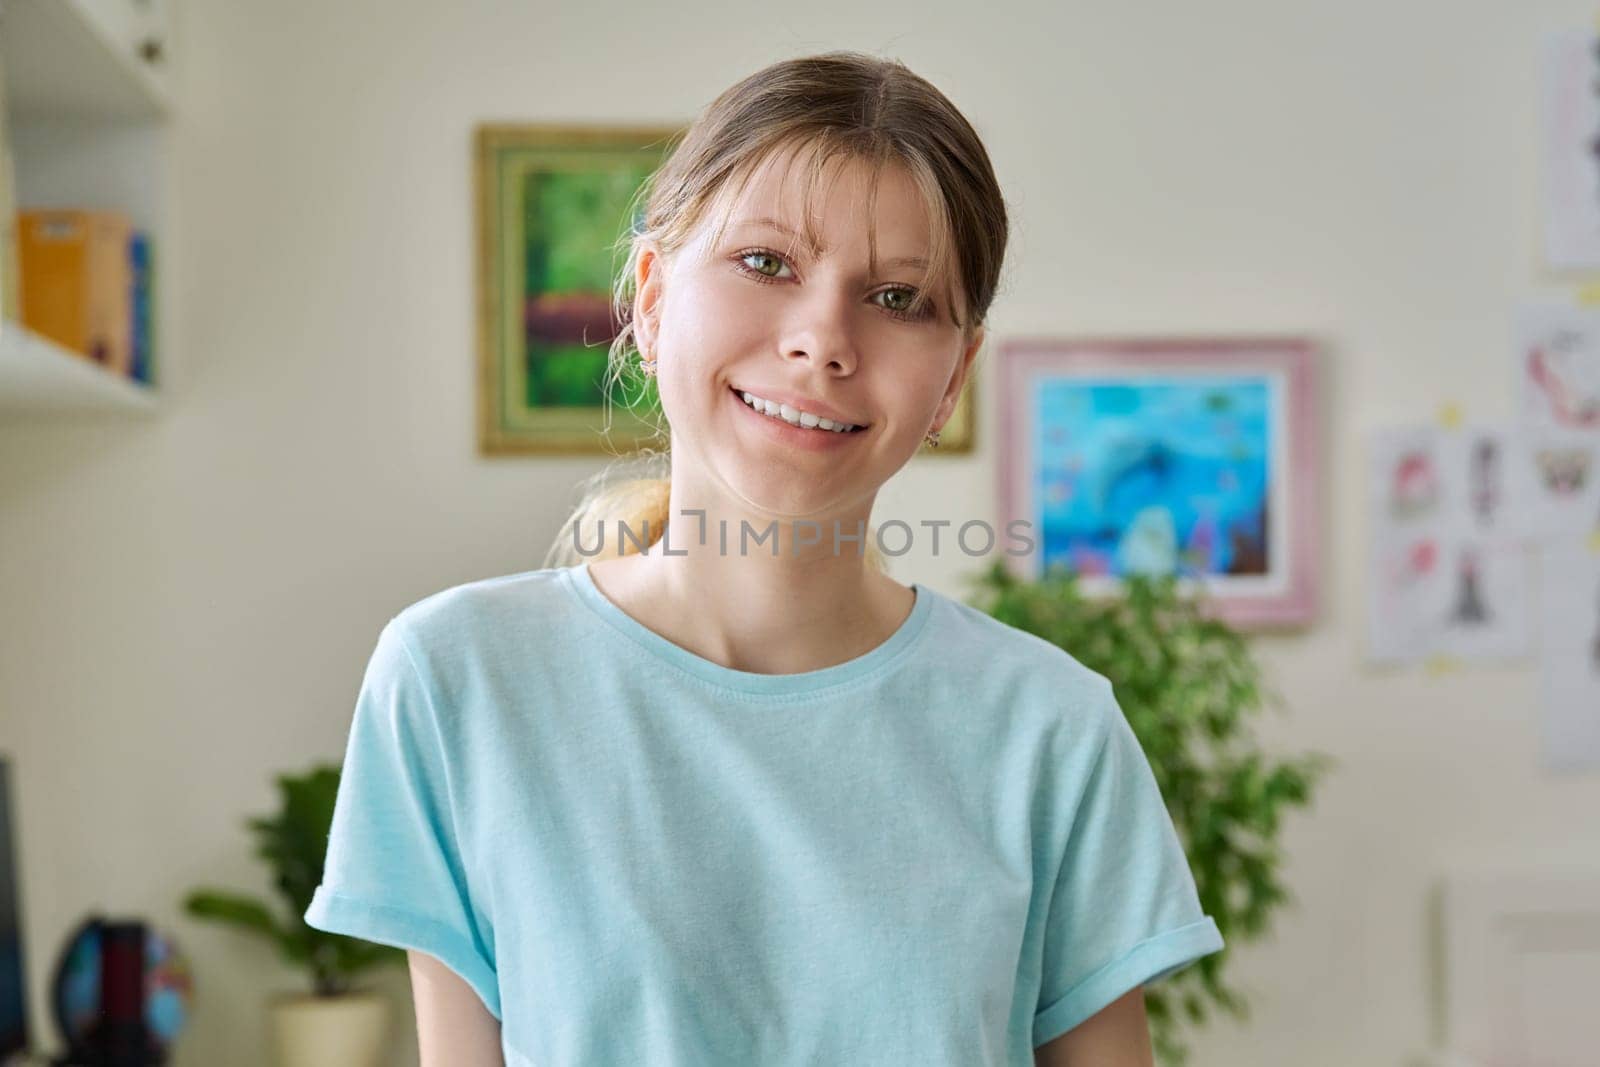 Close up portrait of preteen girl 12, 13, 14 years old, smiling girl looking at camera inside home room